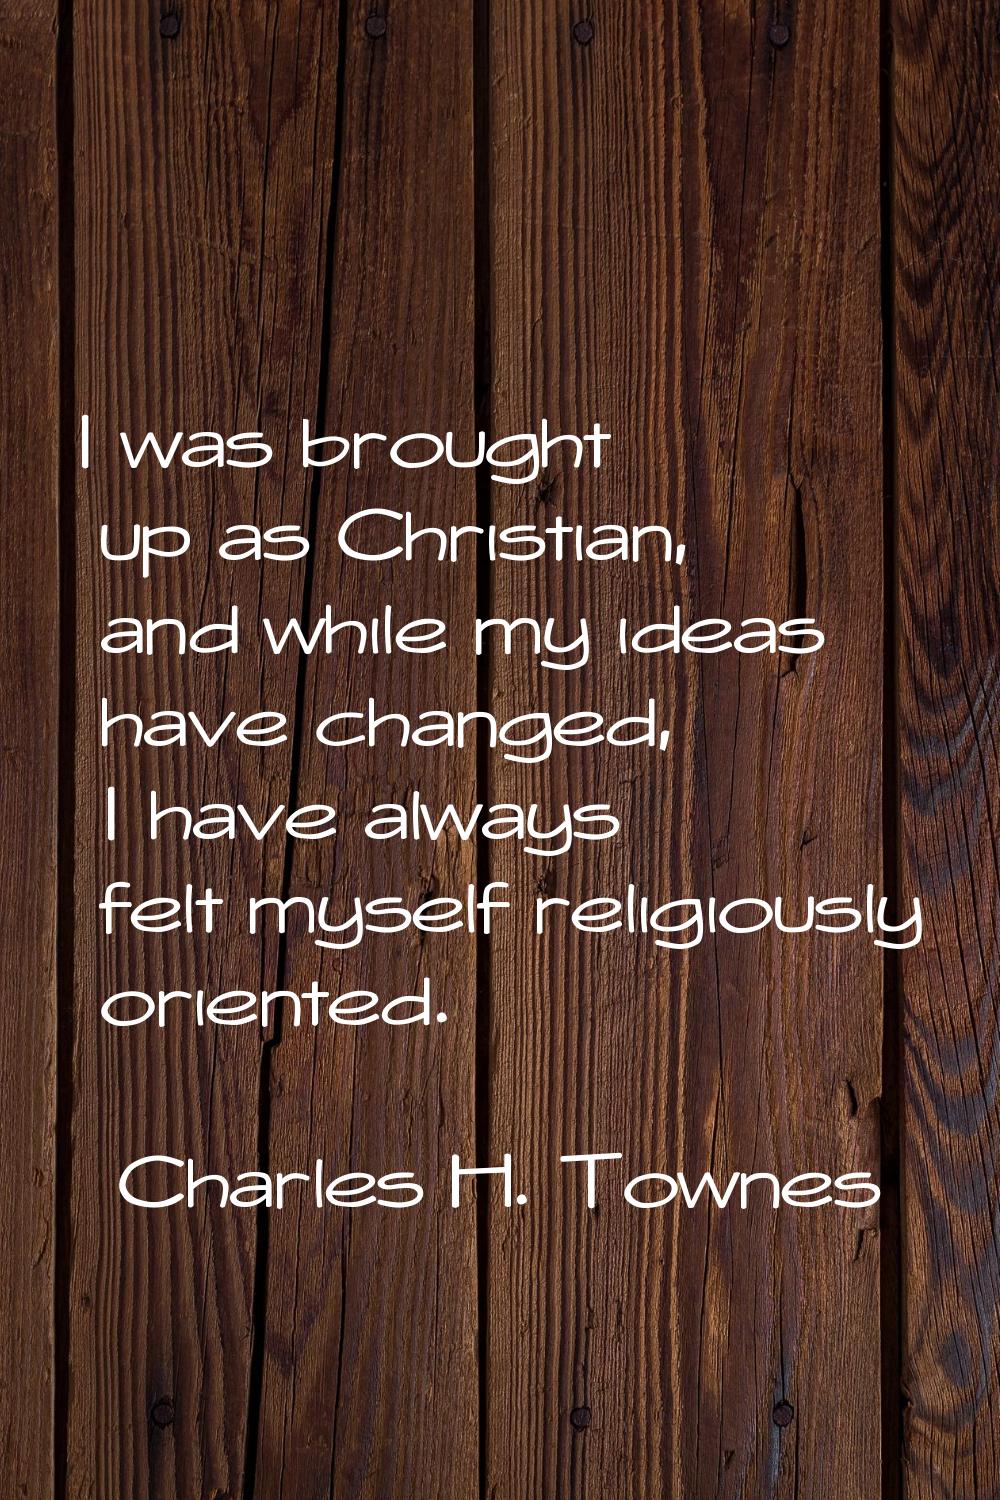 I was brought up as Christian, and while my ideas have changed, I have always felt myself religious